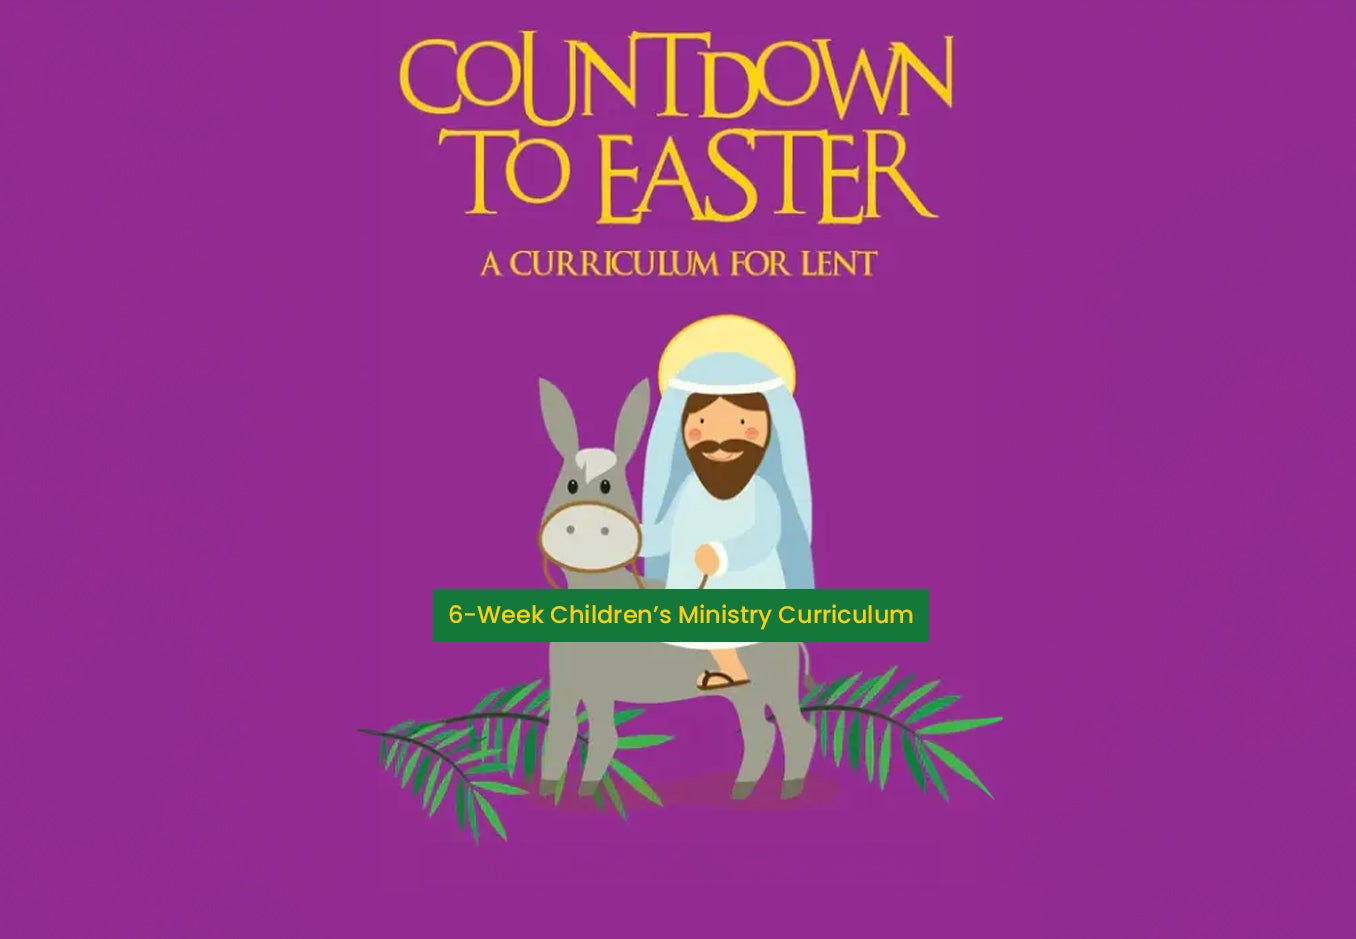 Countdown to Easter 6-Week Children’s Ministry Curriculum